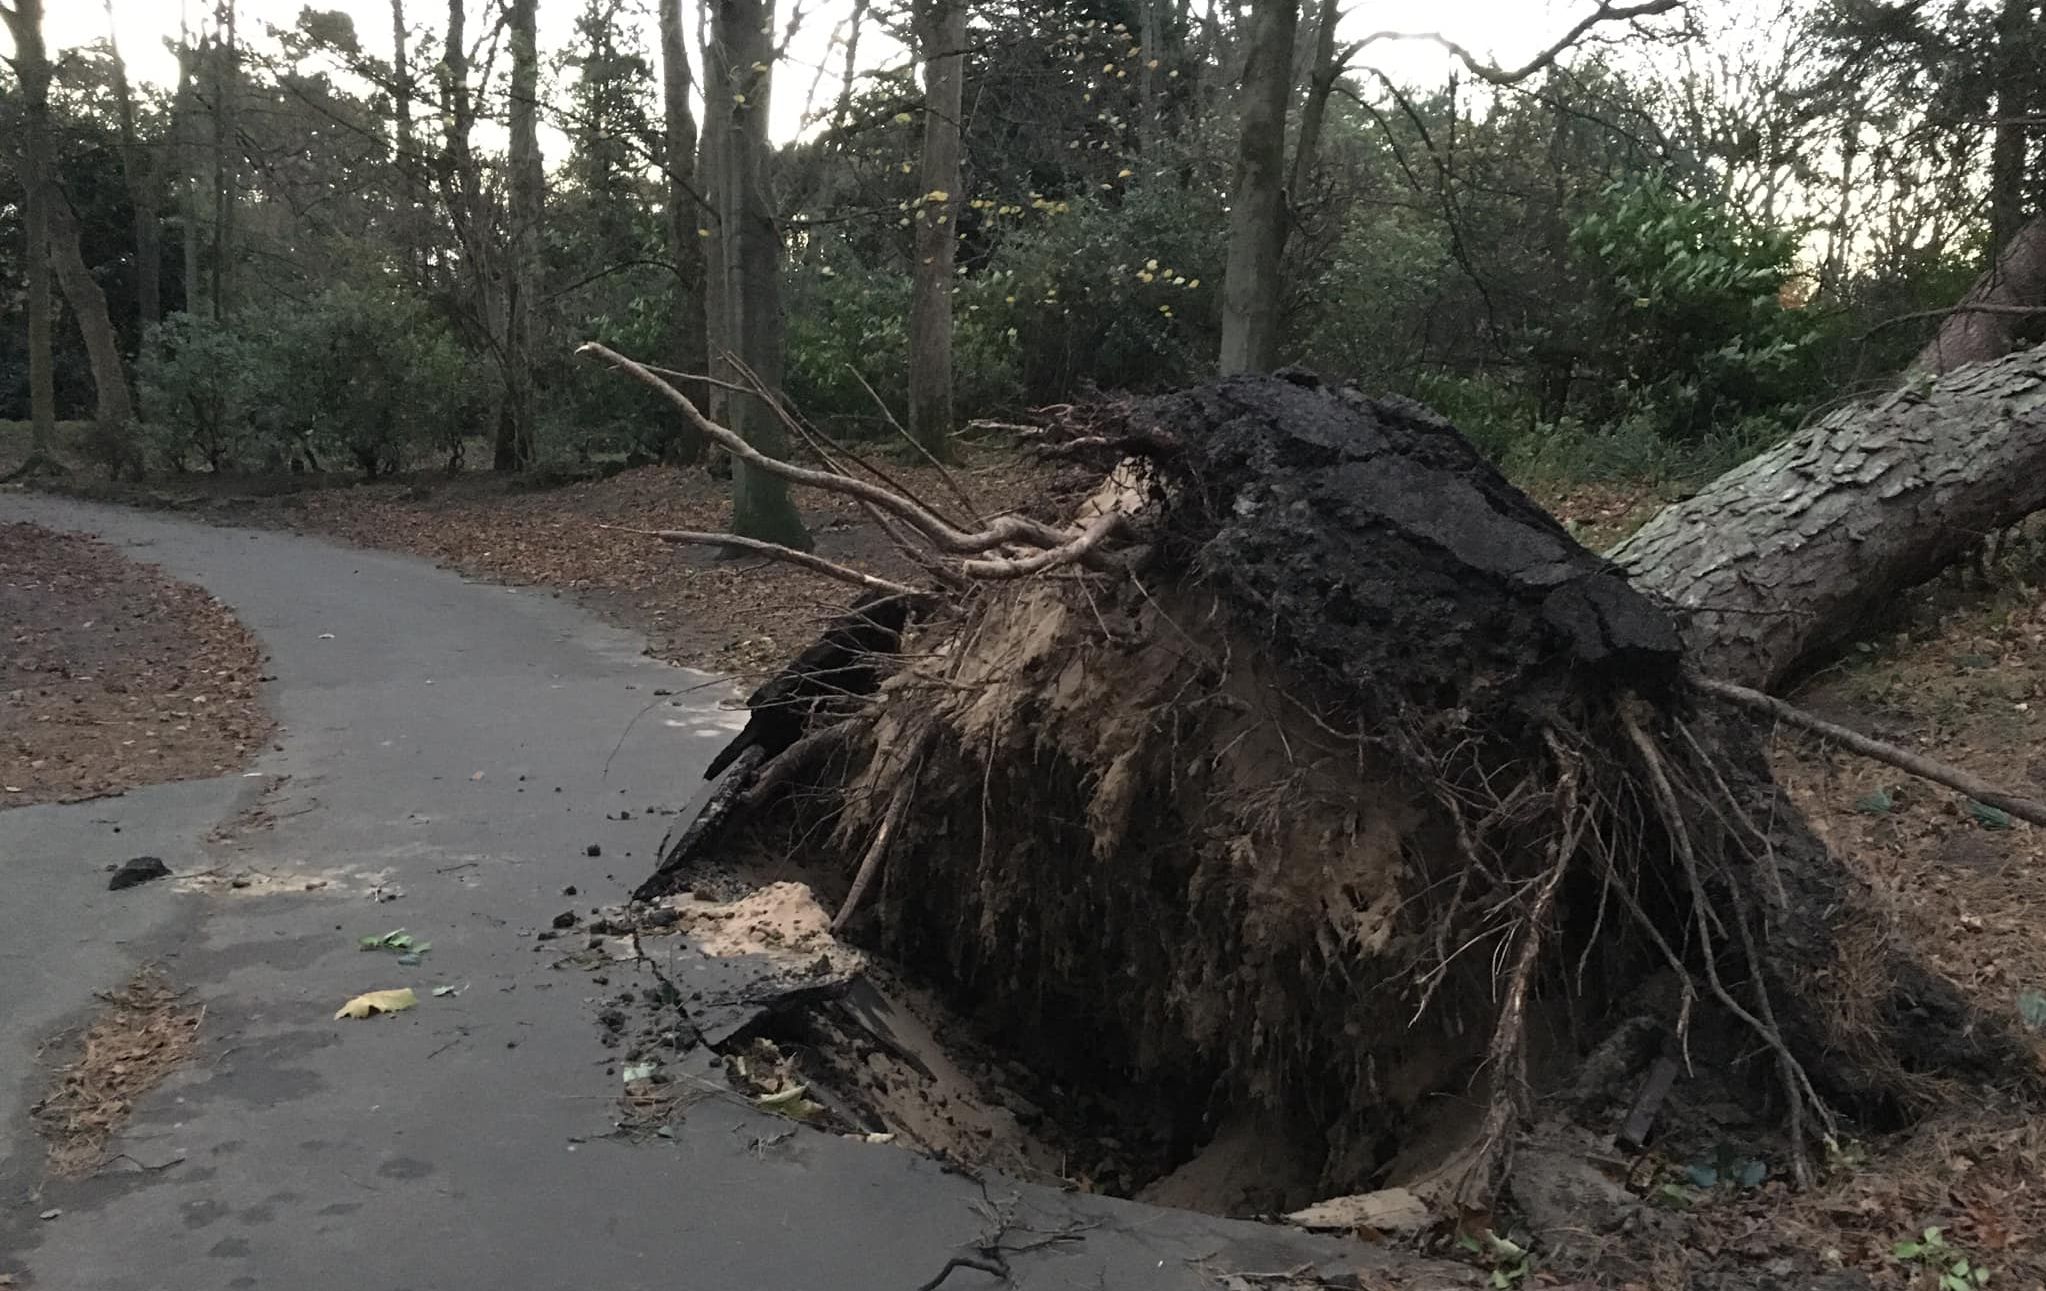 A tree blown down in Hesketh Park in Southport. Photo by Southport parkrun